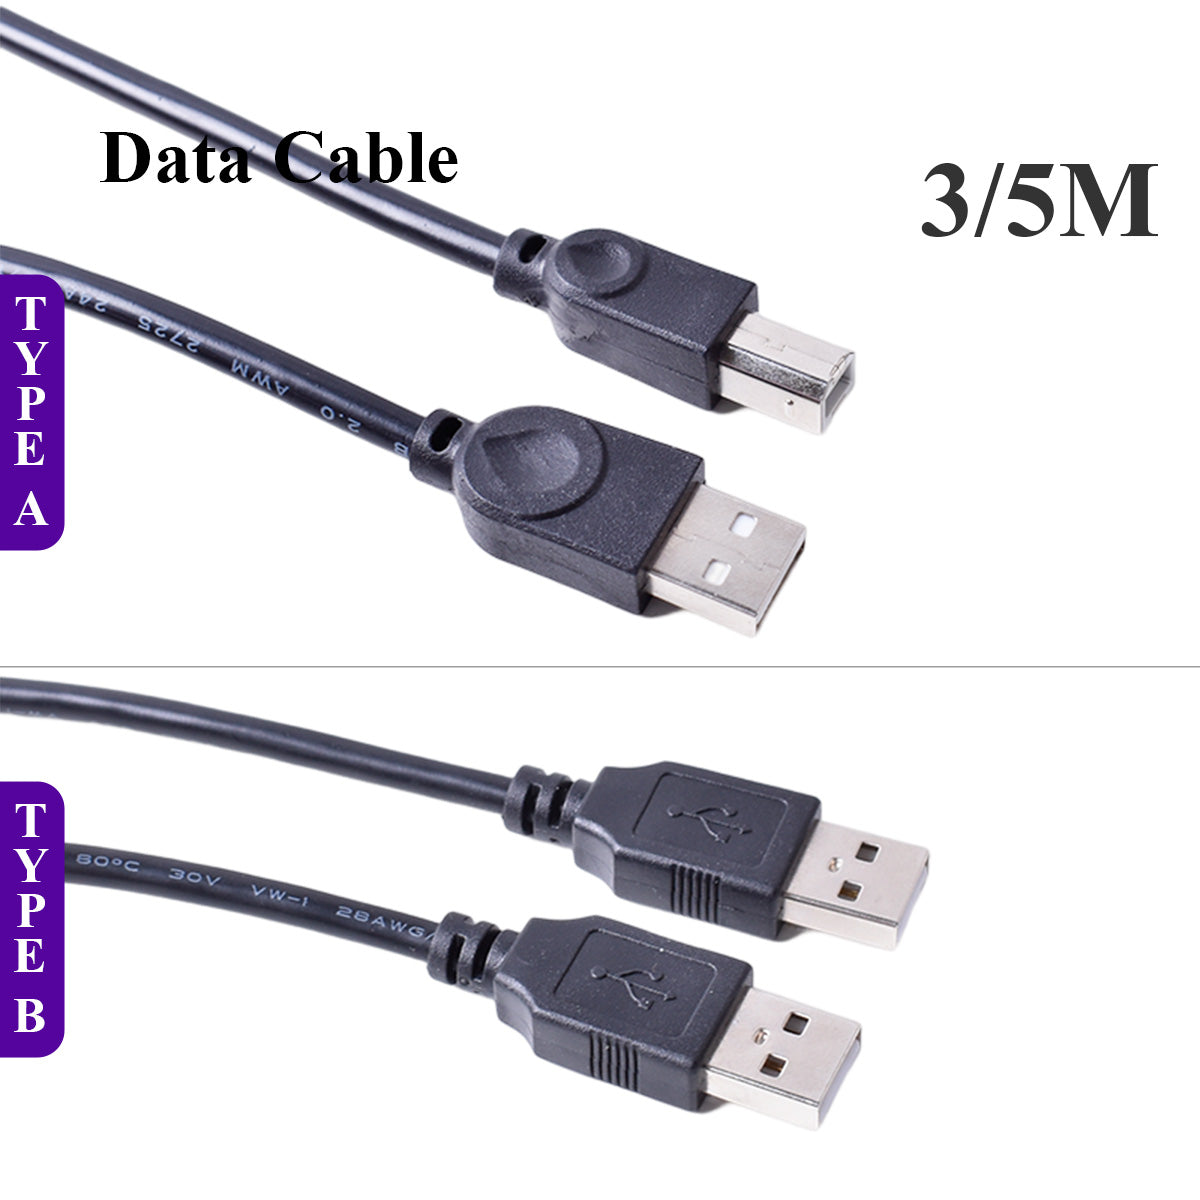 3M 5M USB 2.0  Male to B Male ( AM to BM ) Adapter Converter Data Cable Blue transparent thick